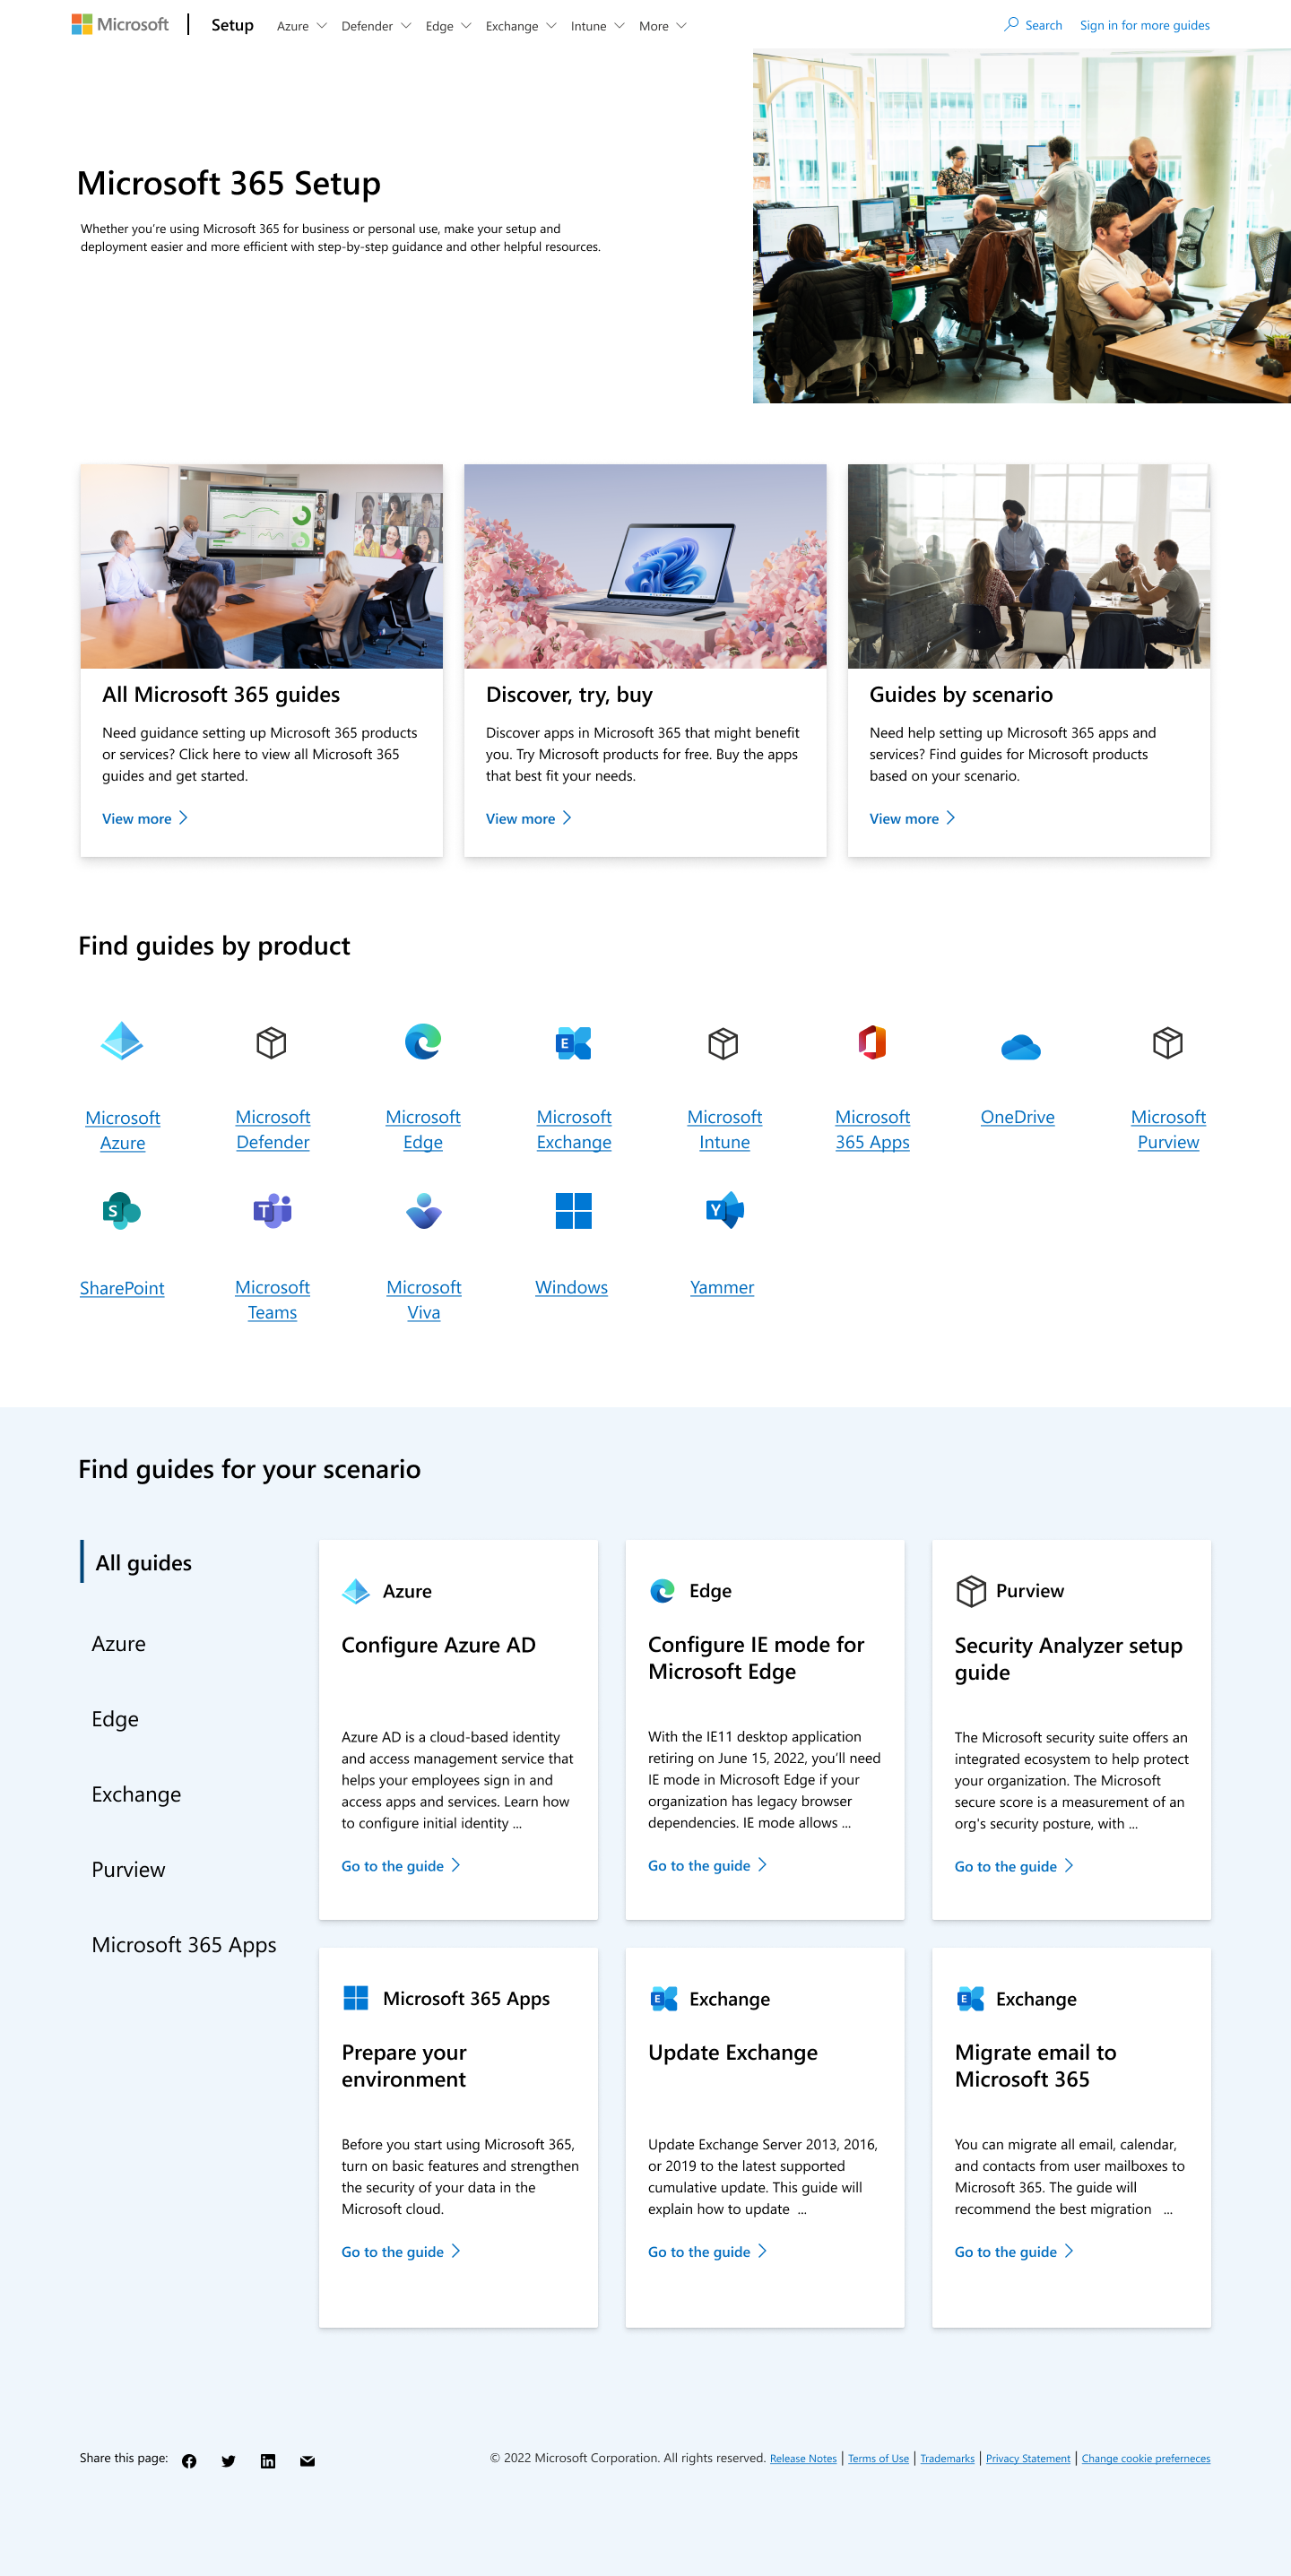 The updated design of the setup.microsoft.com site with new areas to find guides by product or scenario.